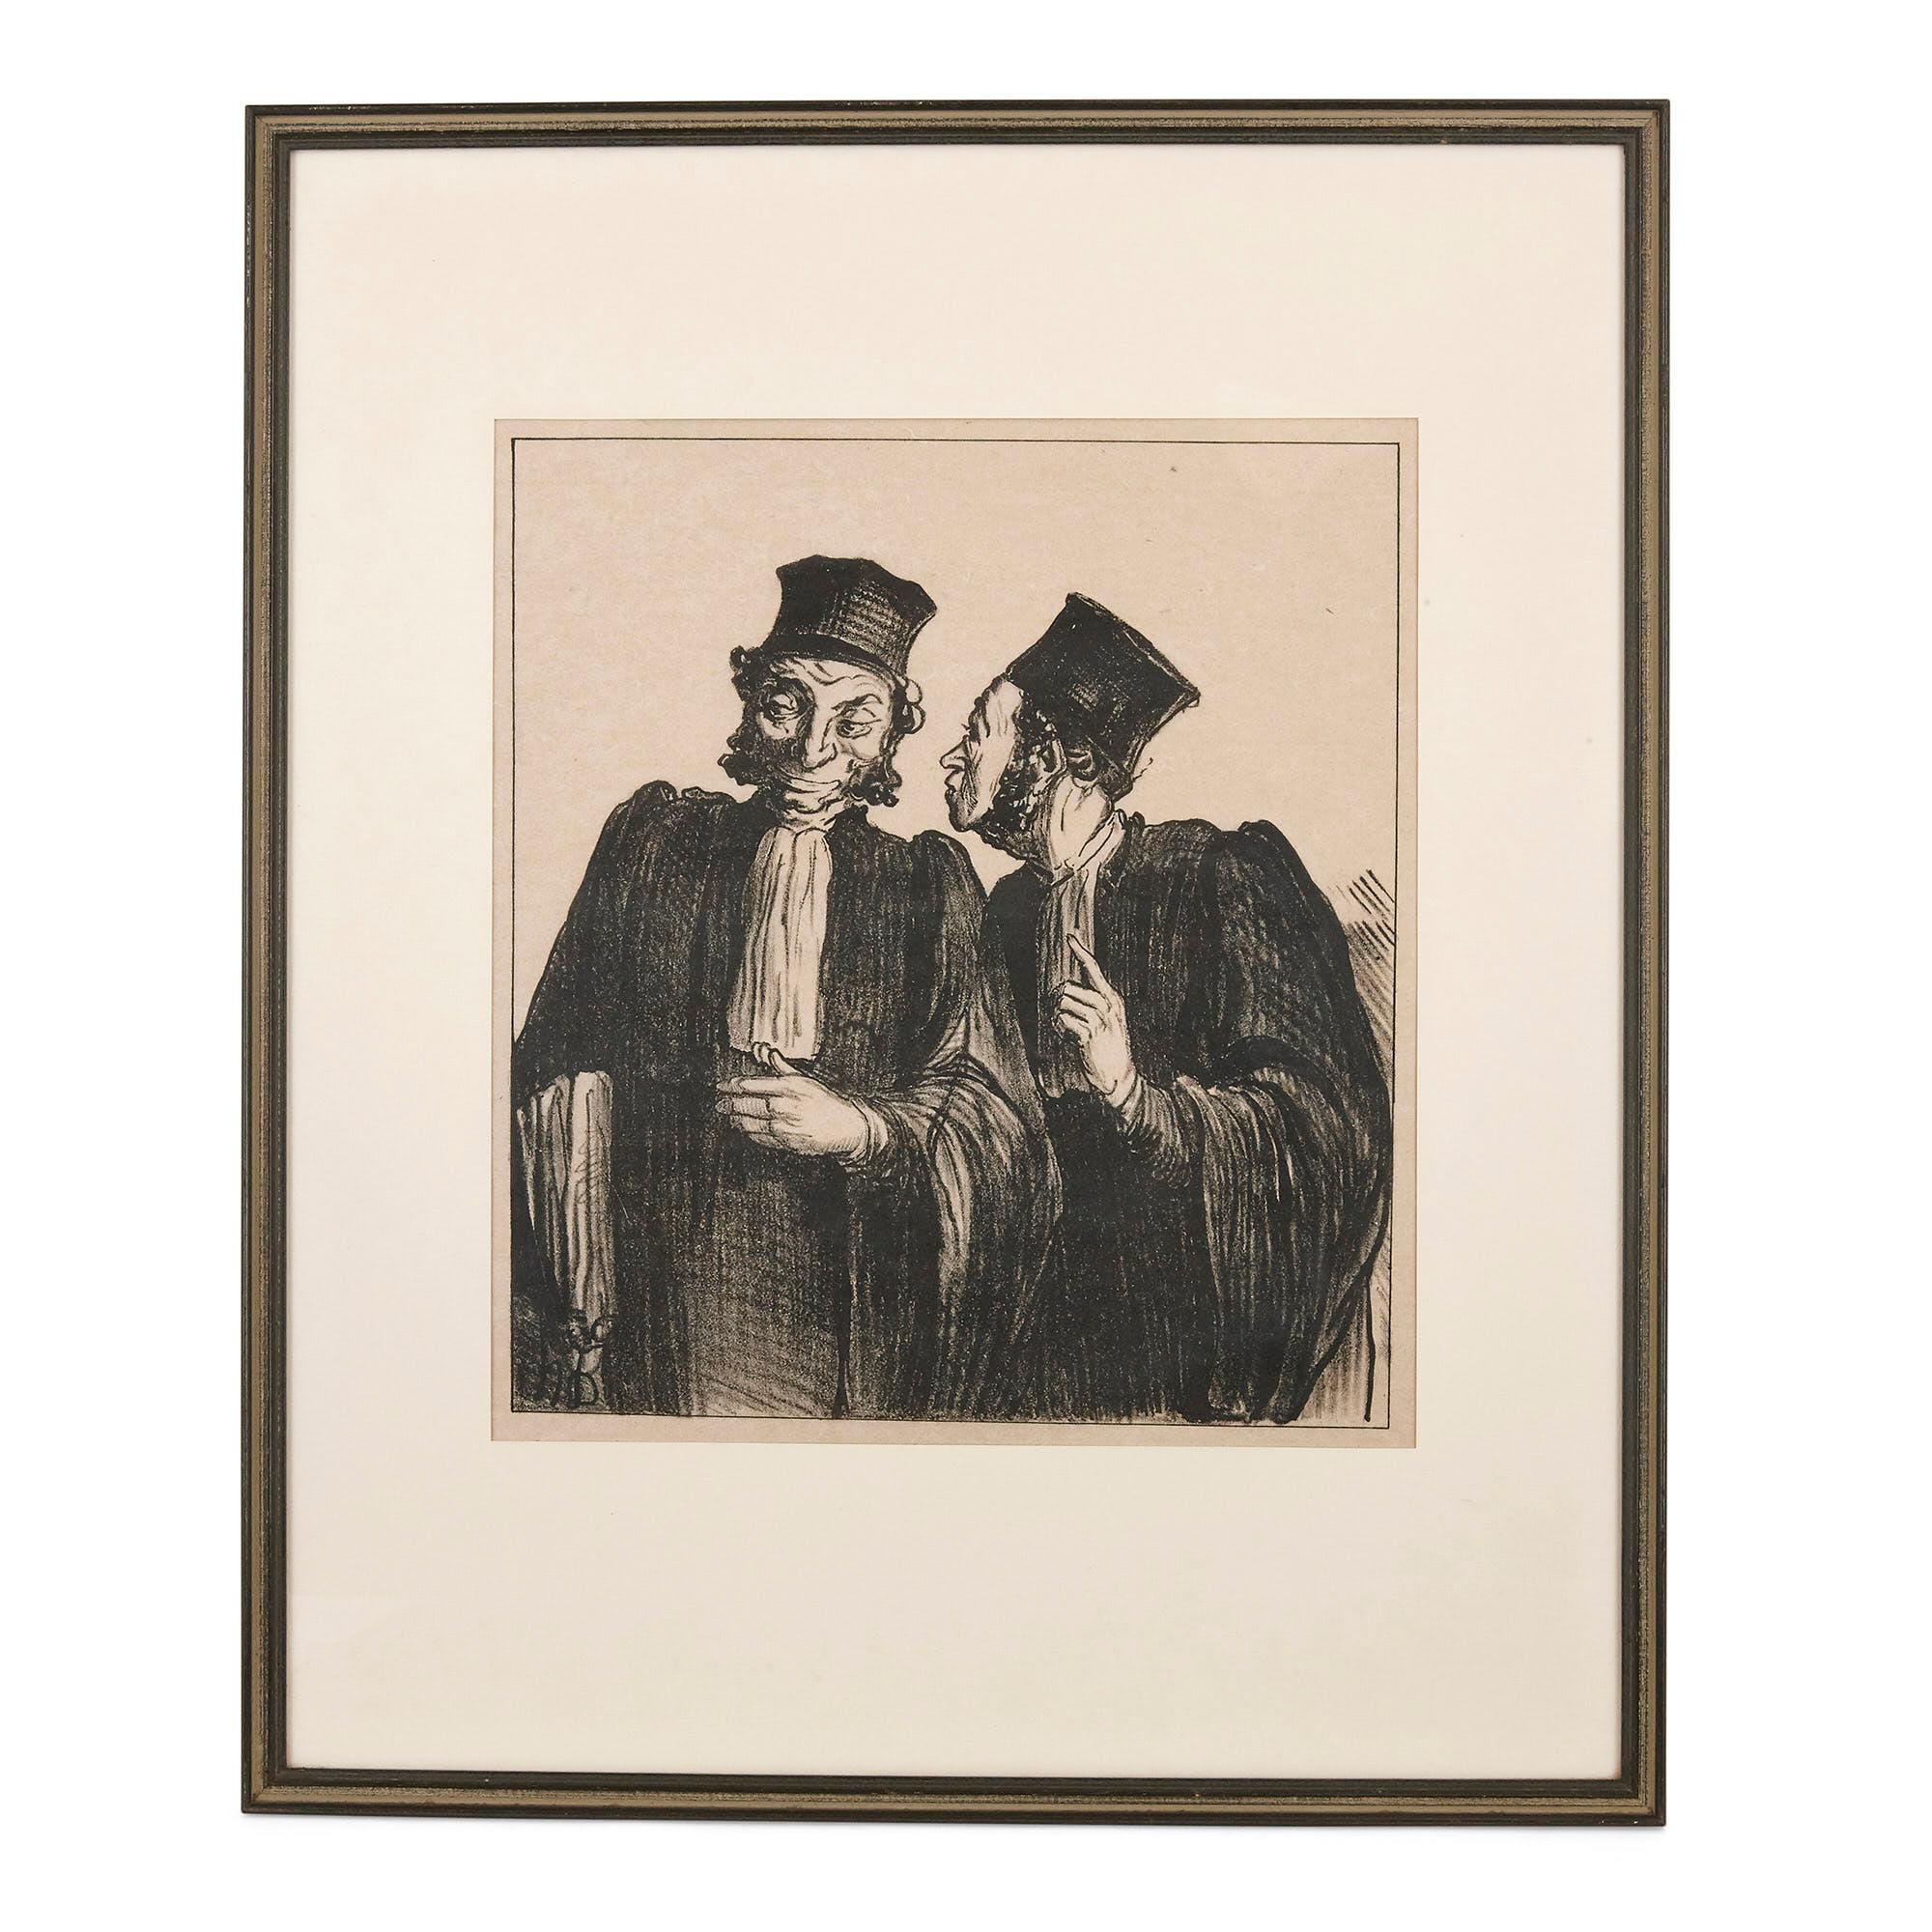 Honoré Daumier - Two lawyers from 'Croquis Parisiens' For Sale at 1stDibs |  daumier lawyers, daumier prints, daumier lithographs